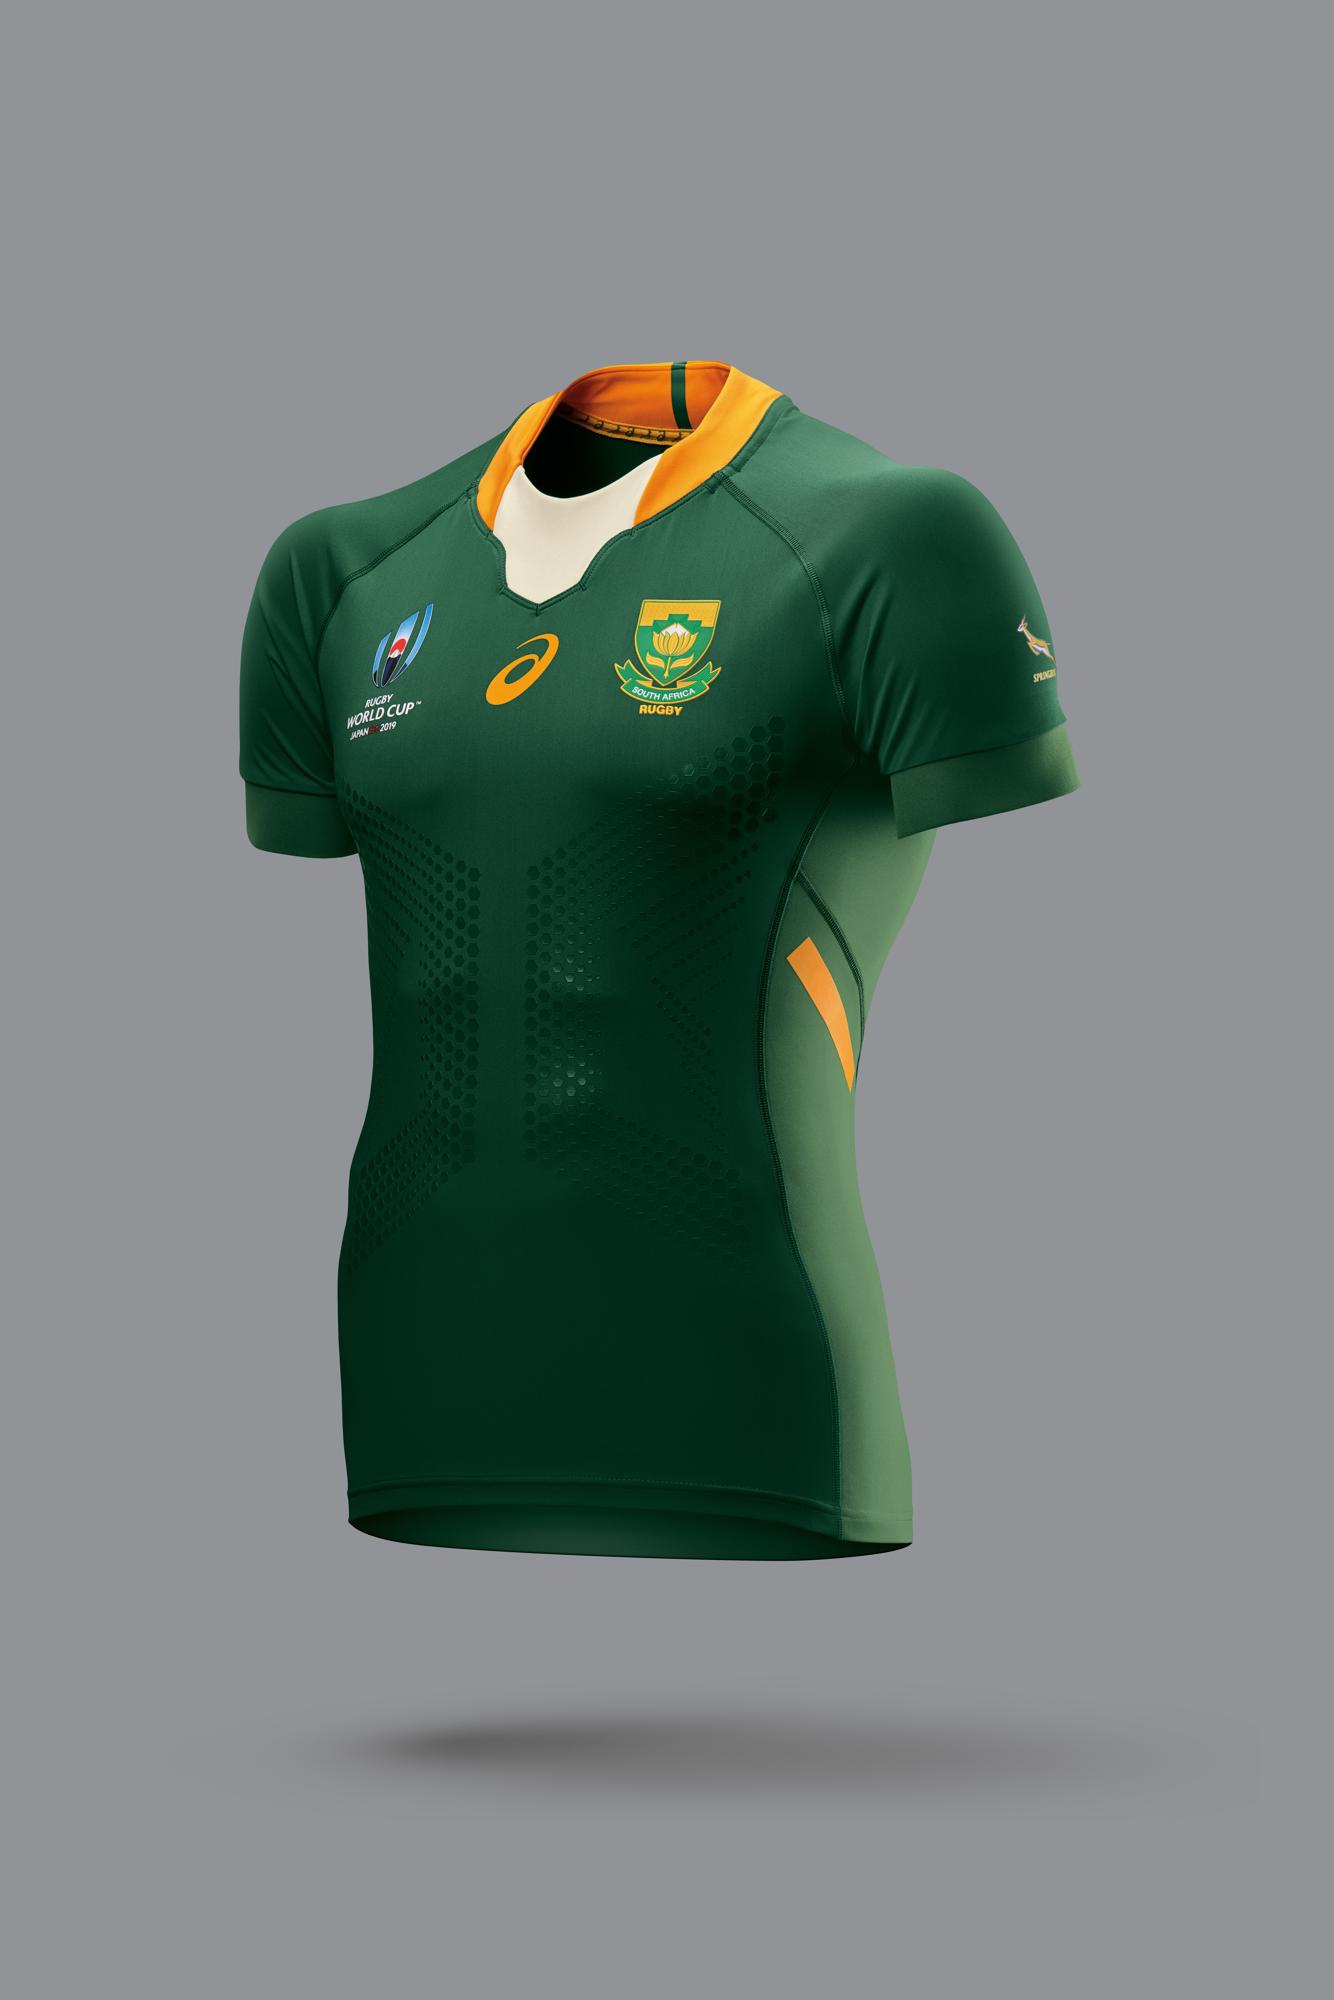 sa rugby jerseys for sale